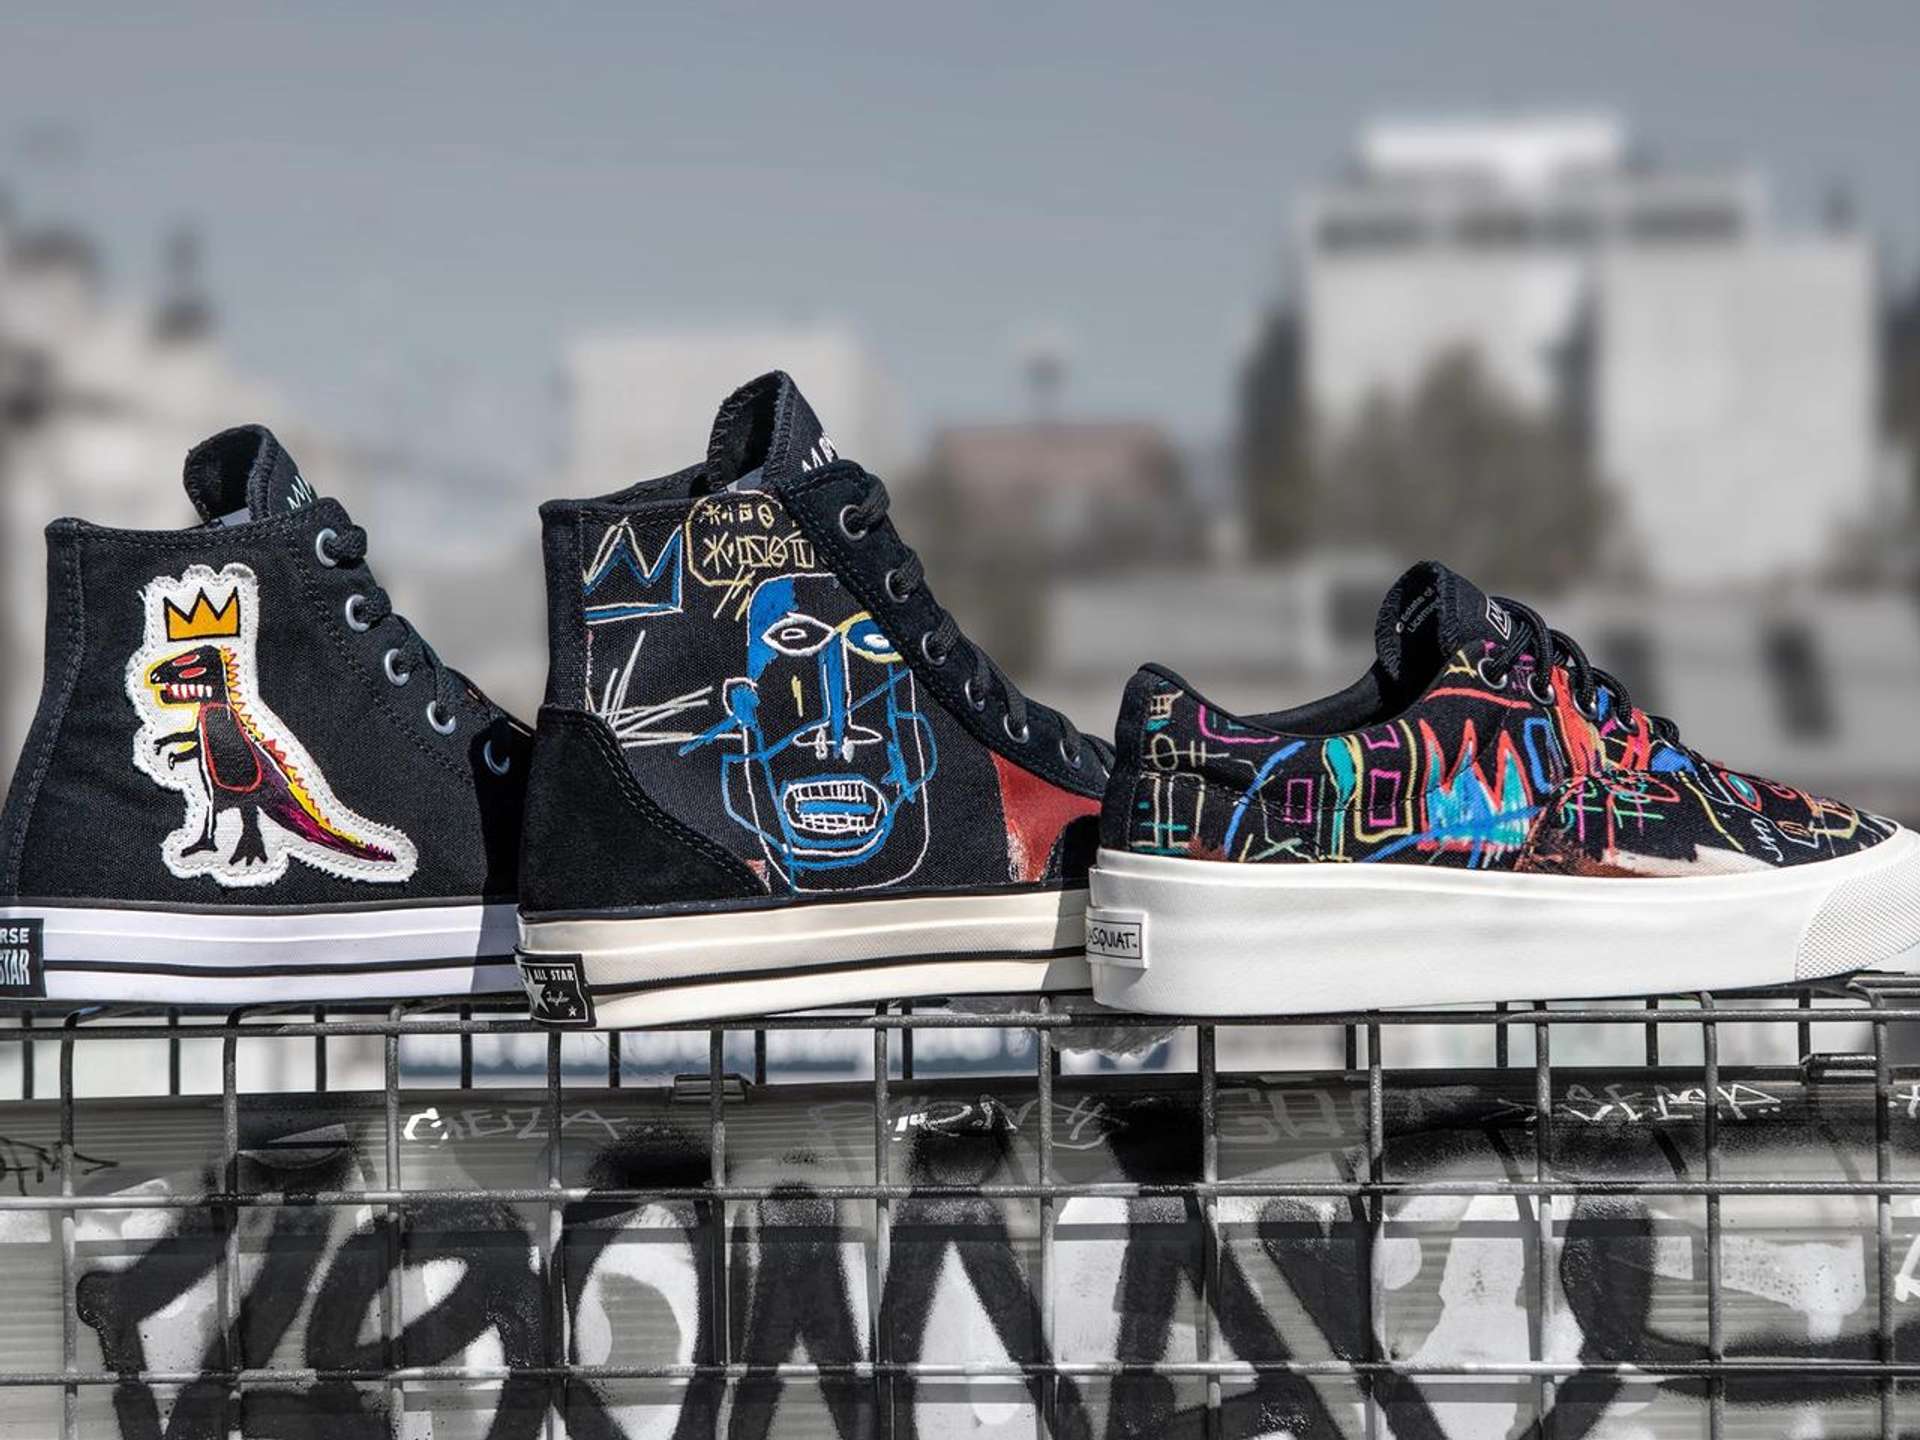 An image of three models of sneakers from the collaboration between Converse and Basquiat.